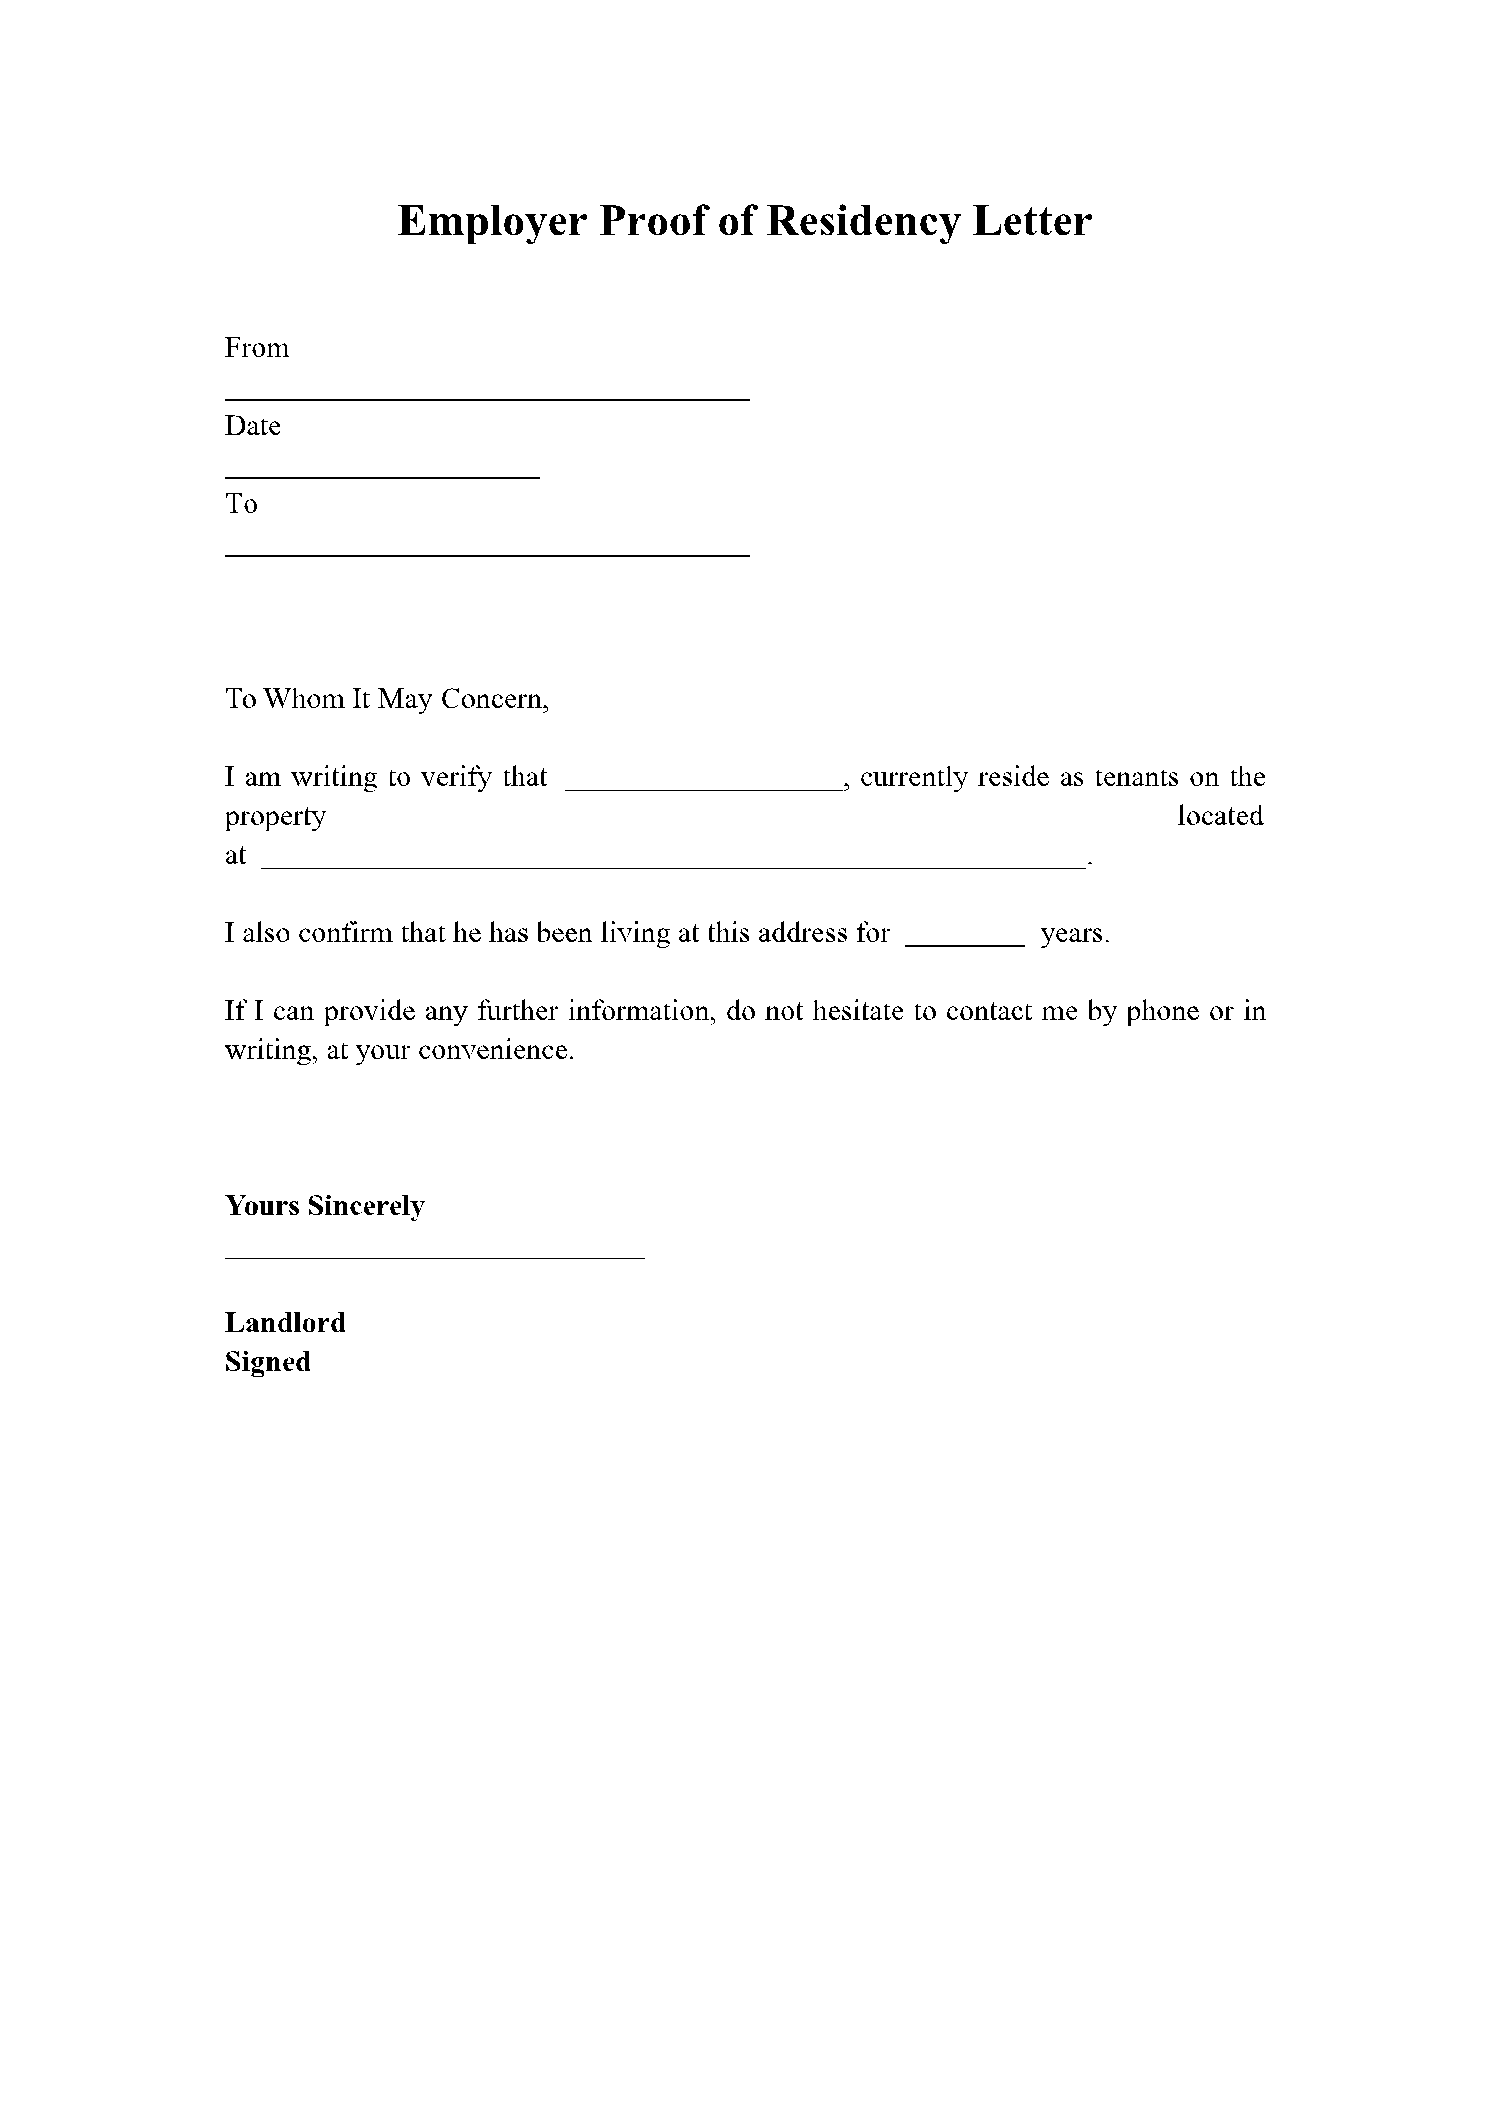 Proof of Residency Letter from Employer